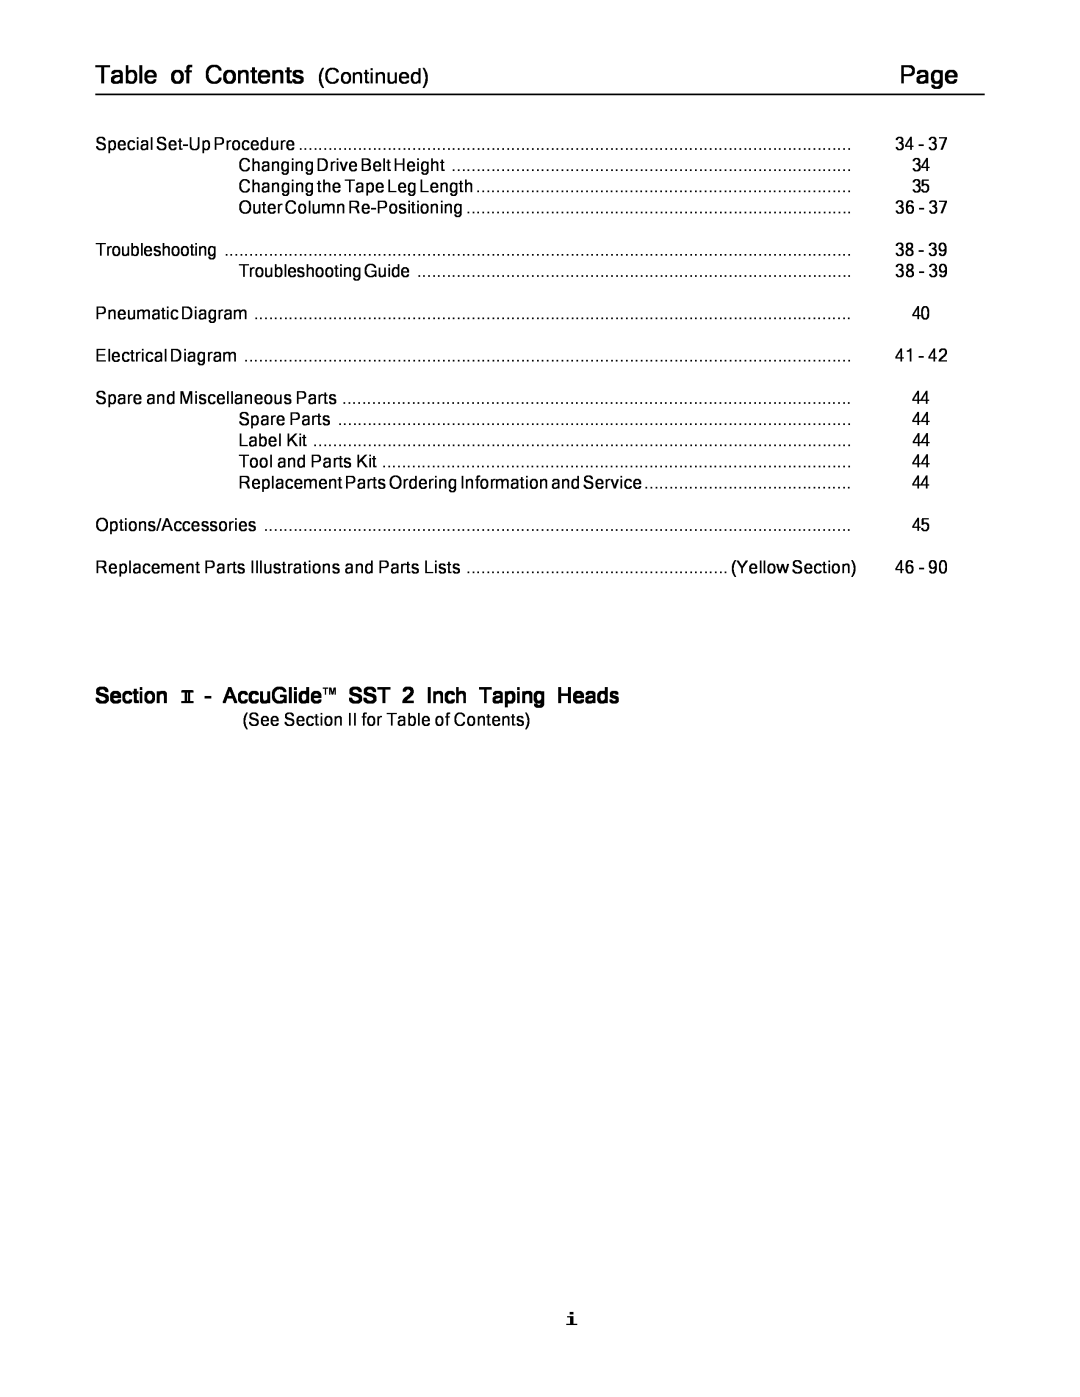 3M 800af-s manual Table of Contents Continued, Page, Section I – AccuGlide SST 2 Inch Taping Heads 